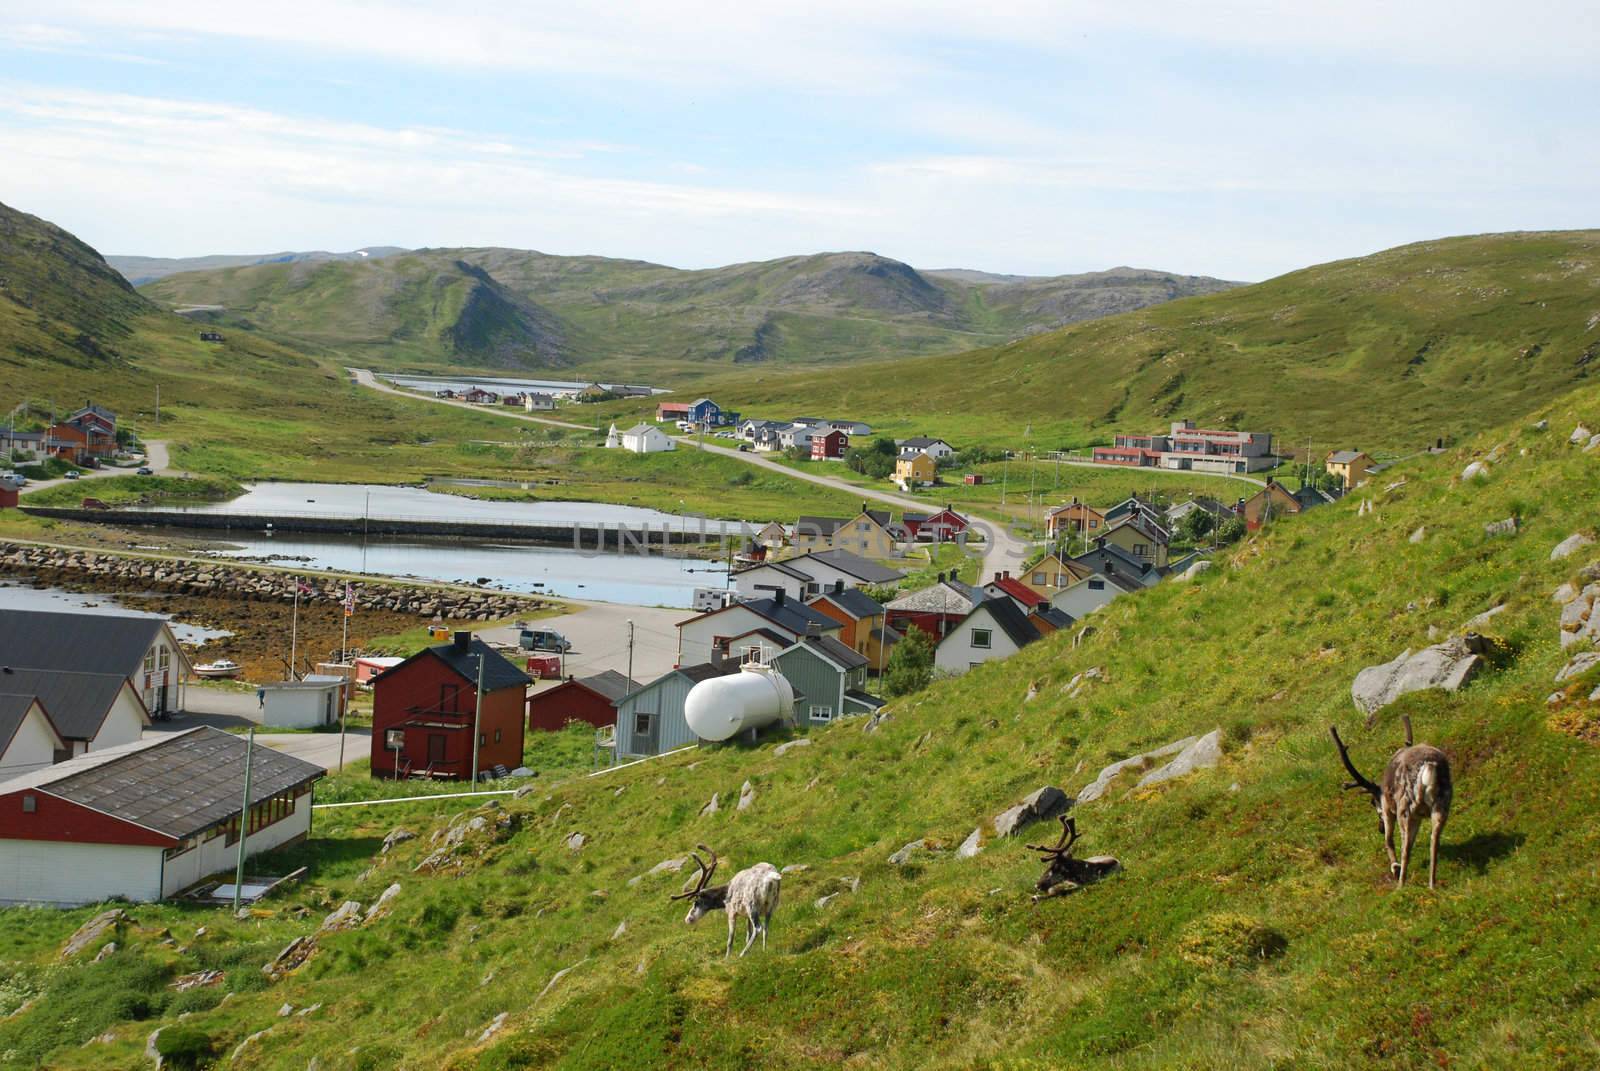 Skarsvag village of fishers in the border of Risfjorden of Mageroya Island, suttounded by desert tundra landscape and polar deers at foreground